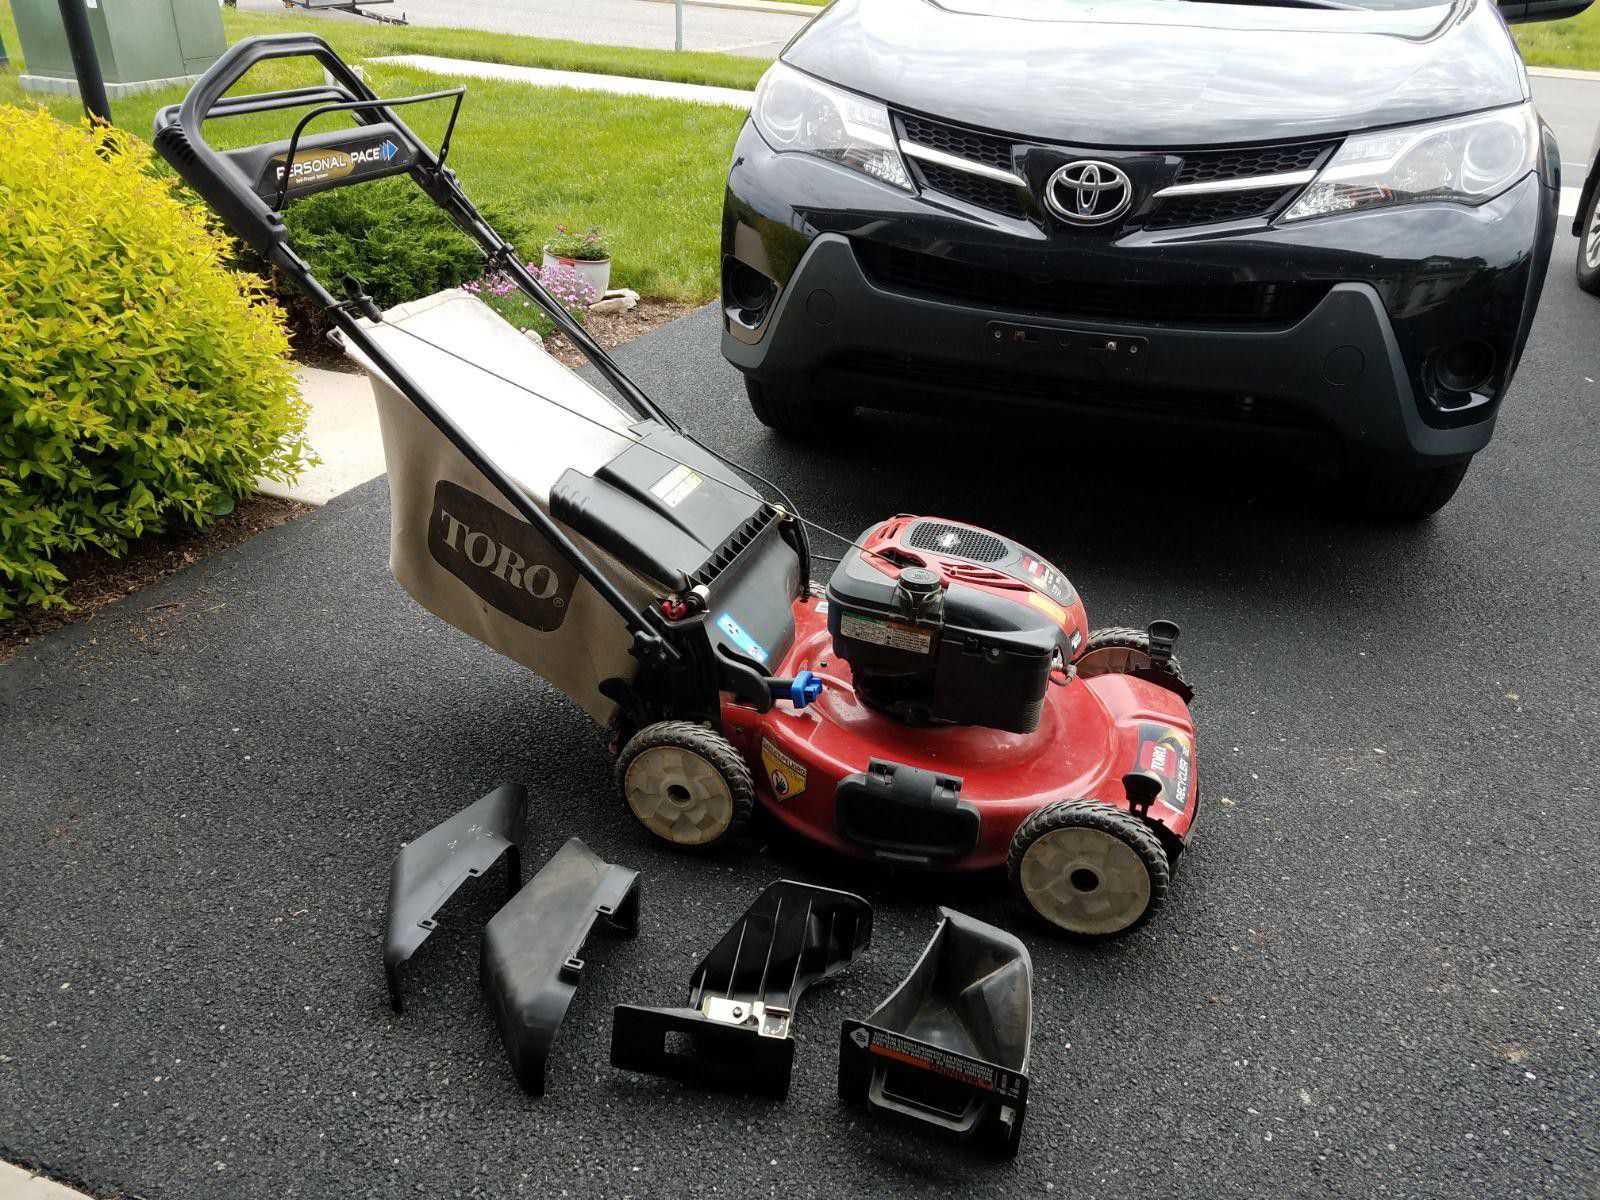 PRICE REDUCED: TORO 22-inch Personal Pace Recycler Lawn Mower. Model 20332